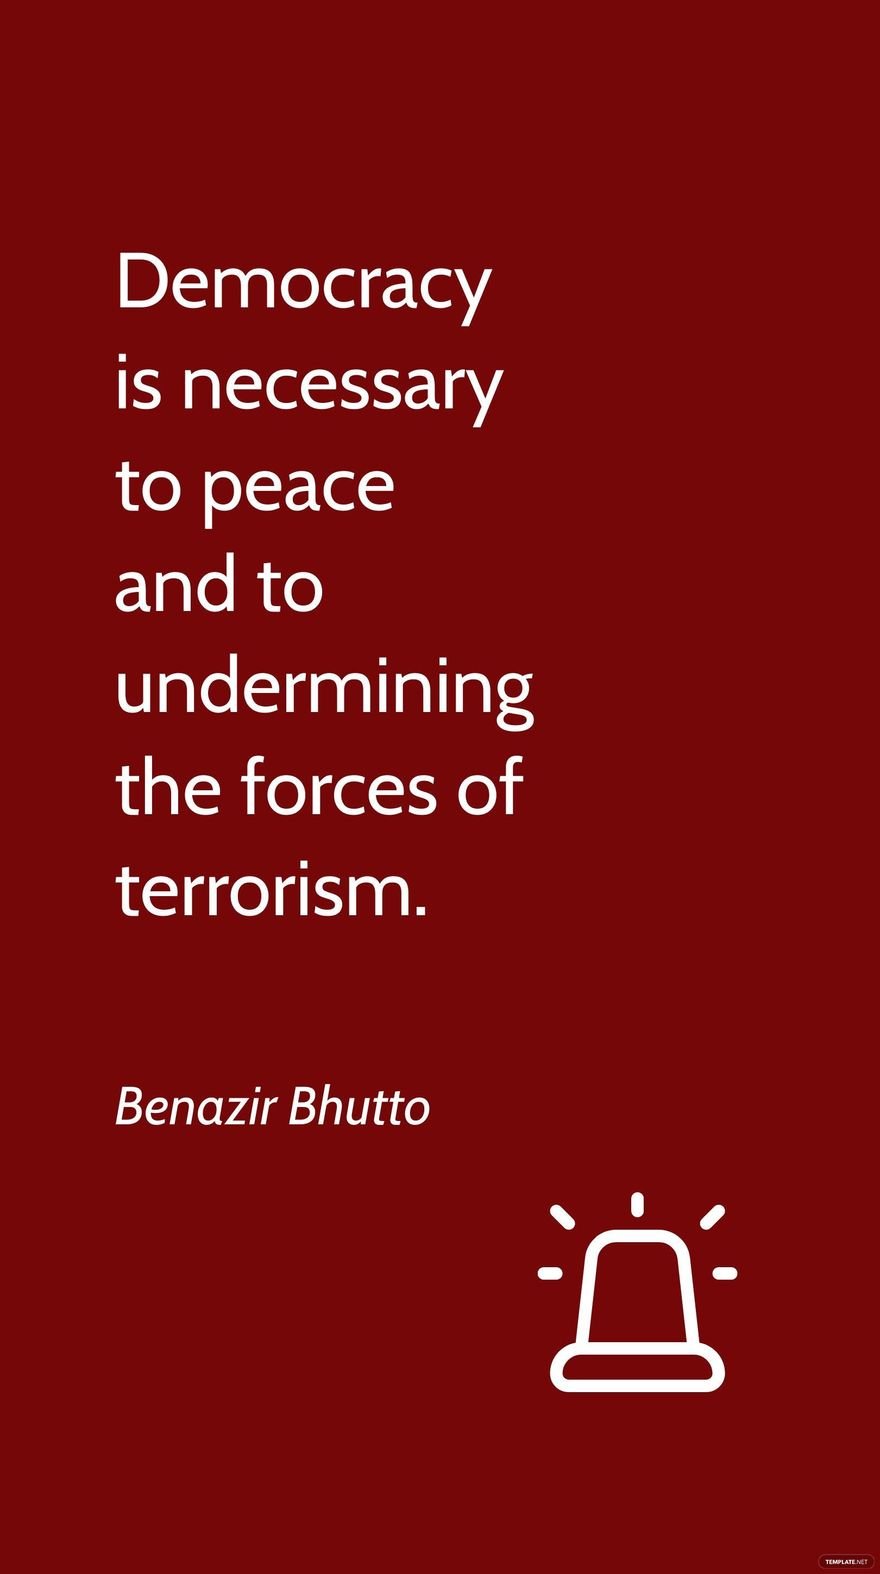 Benazir Bhutto - Democracy is necessary to peace and to undermining the forces of terrorism. in JPG